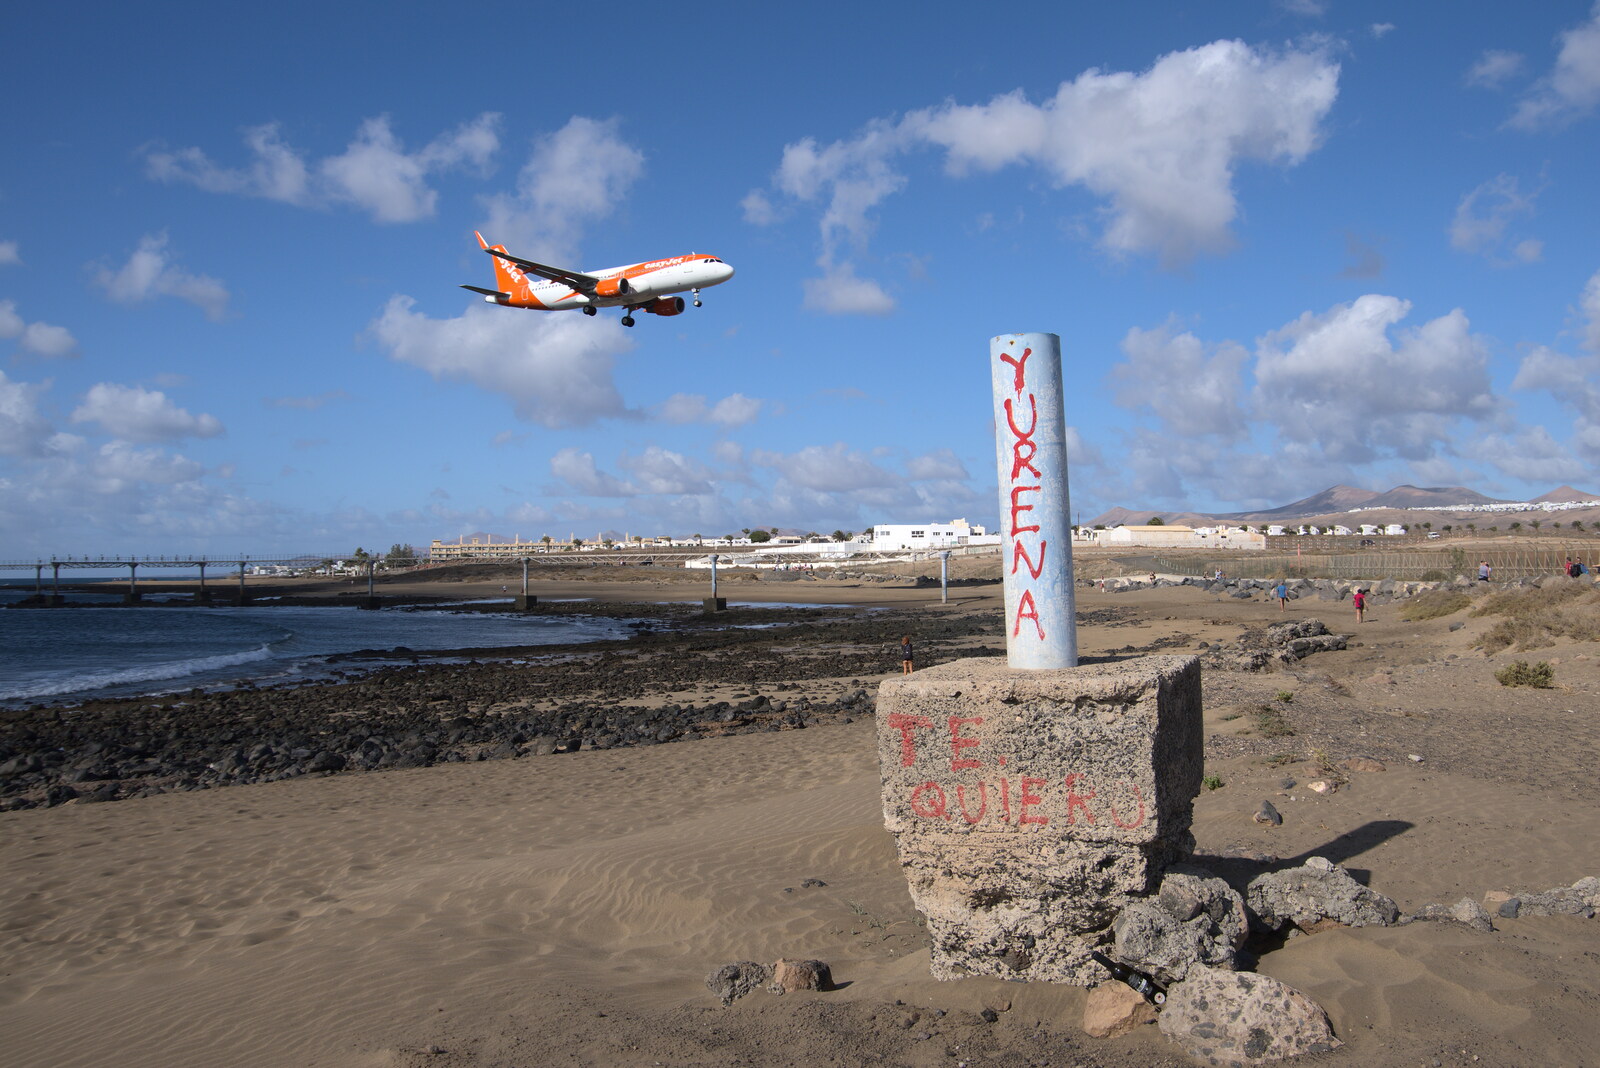 An EasyJet 737 and some graffiti on the beach from Five Days in Lanzarote, Canary Islands, Spain - 24th October 2021